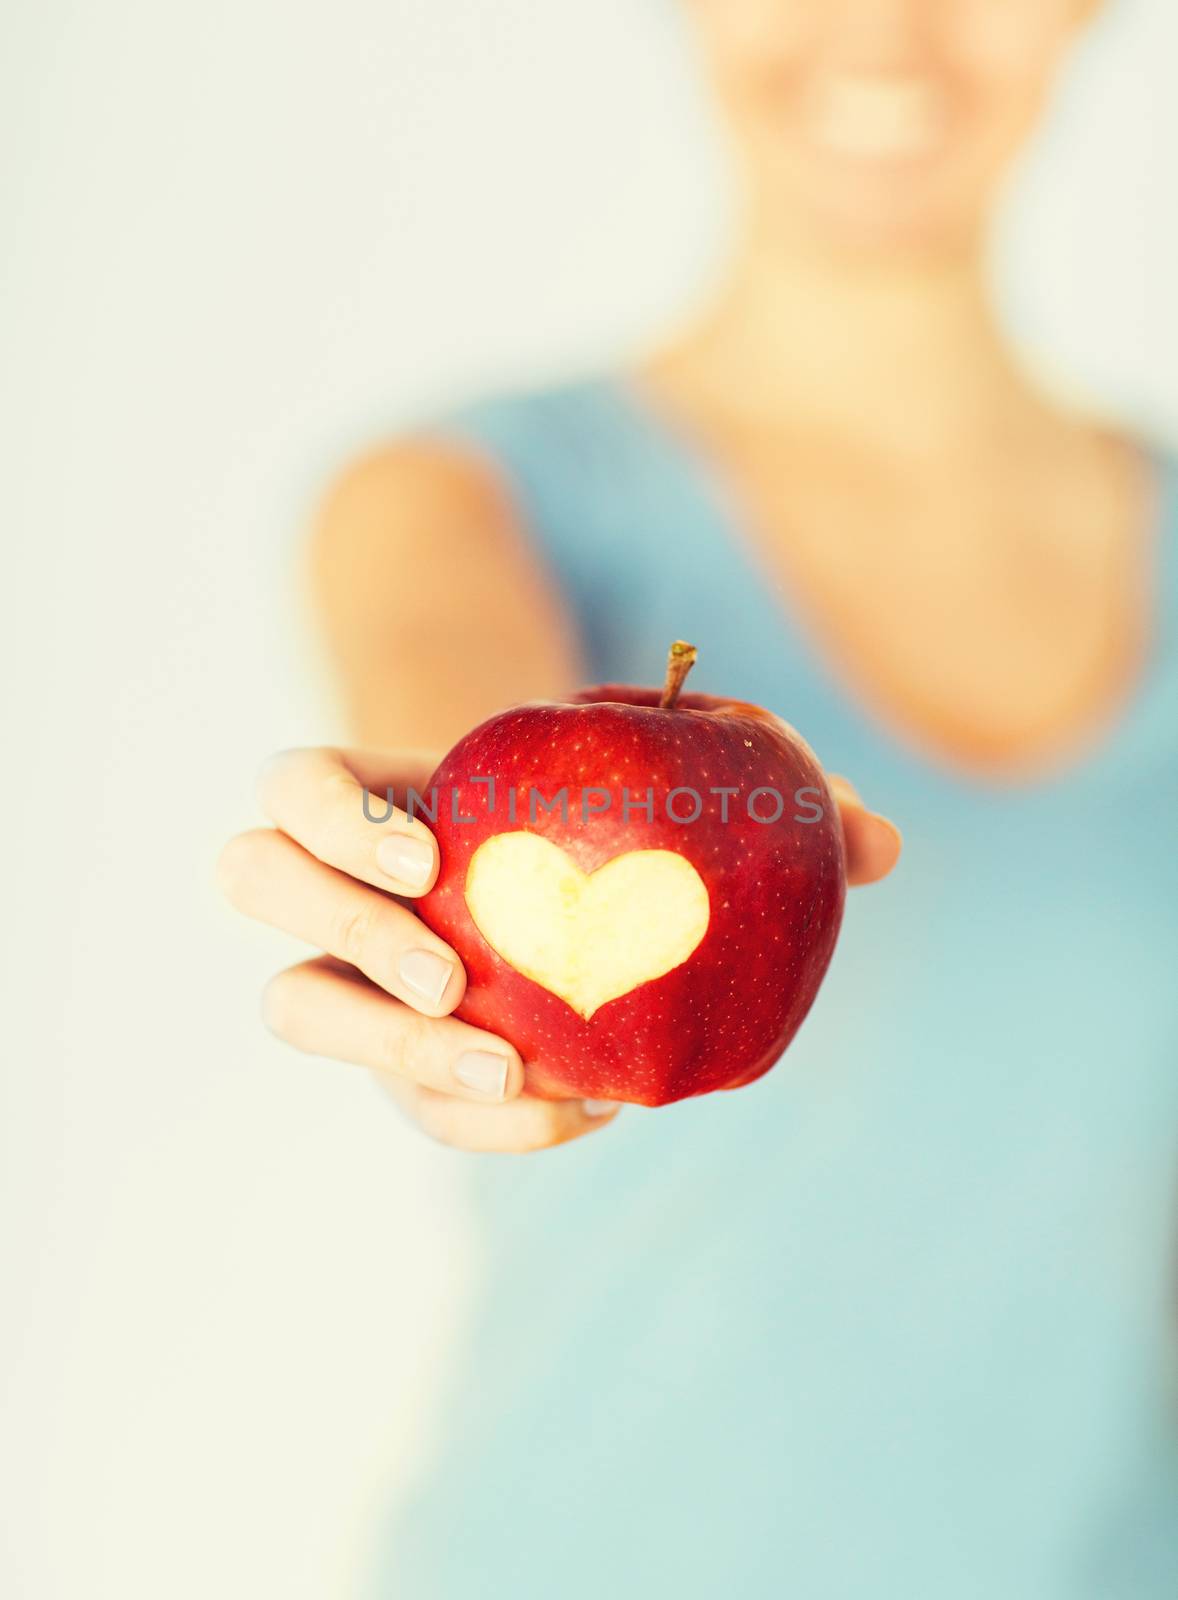 healthy food and lifestyle - woman hand holding red apple with heart shape